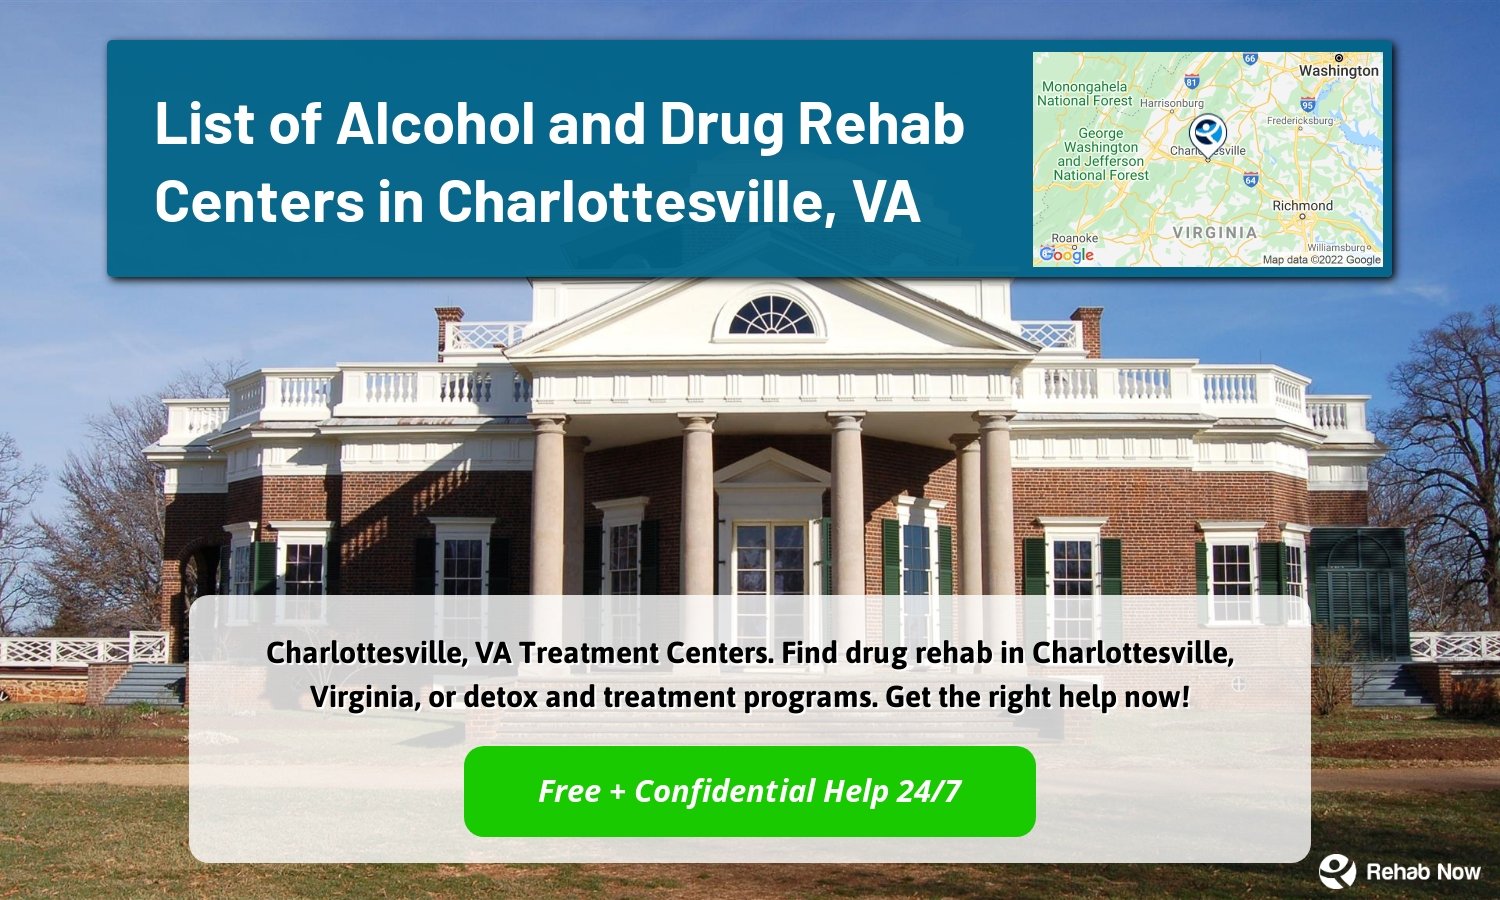 Charlottesville, VA Treatment Centers. Find drug rehab in Charlottesville, Virginia, or detox and treatment programs. Get the right help now!